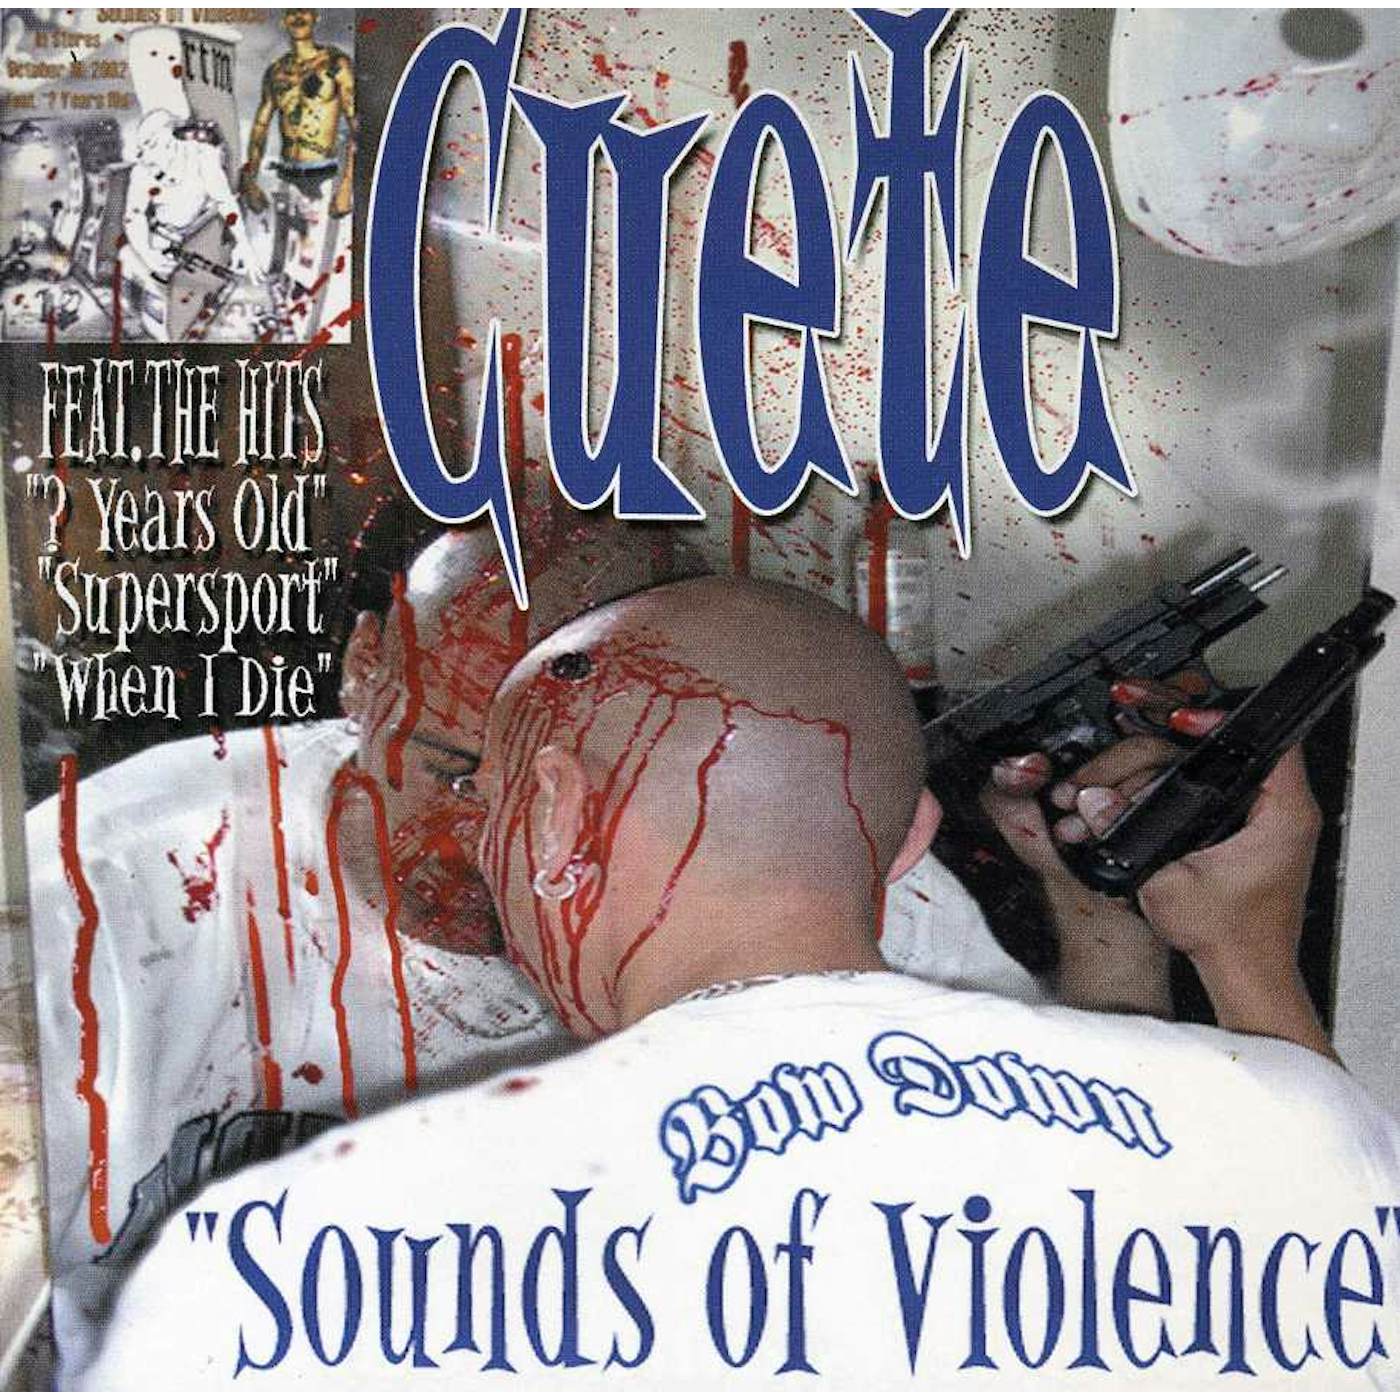 Cuete SOUNDS OF VIOLENCE CD